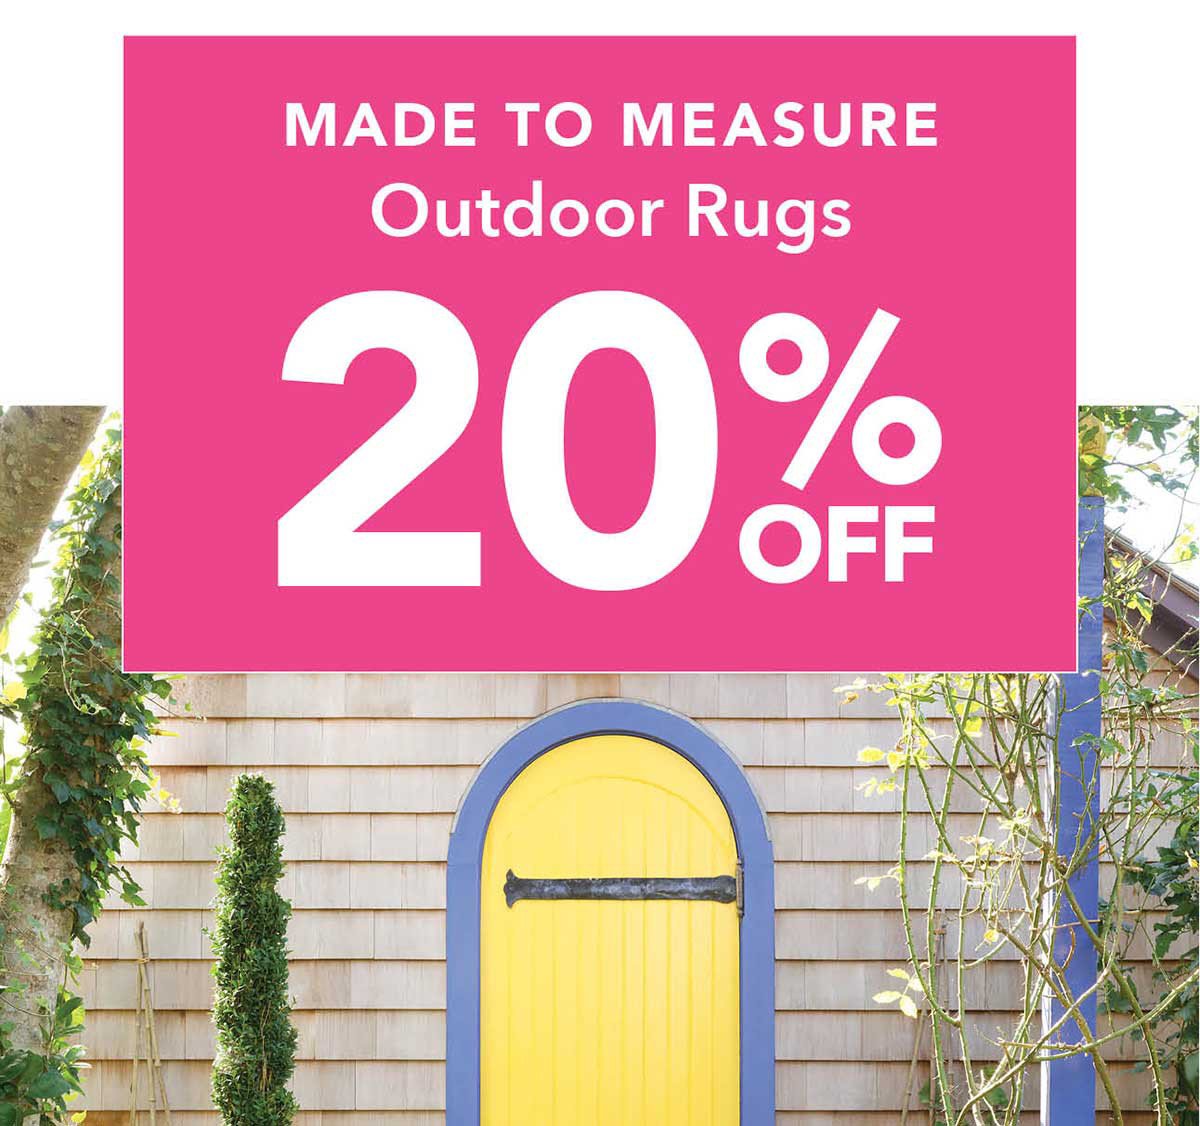 Made To Measure Outdoor Rugs 20% OFF